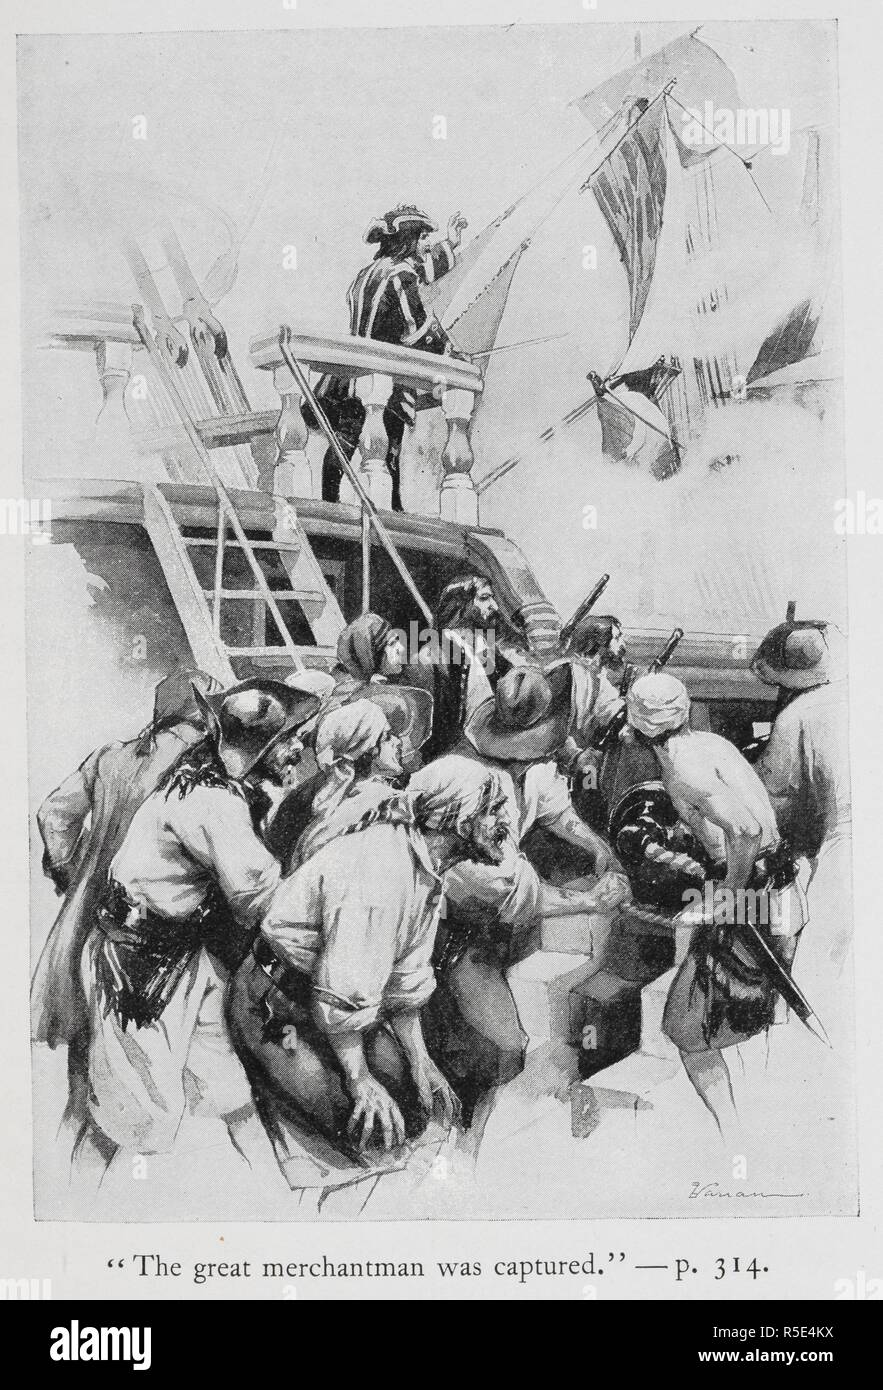 'The great merchantman was captured'. Illustration showing pirates waiting to board a ship. Buccaneers and Pirates of our Coasts ... New York, 1898. Source: 9770.aa.8, opposite 314. Author: Stockton, Frank Richard. Varian, G. Stock Photo